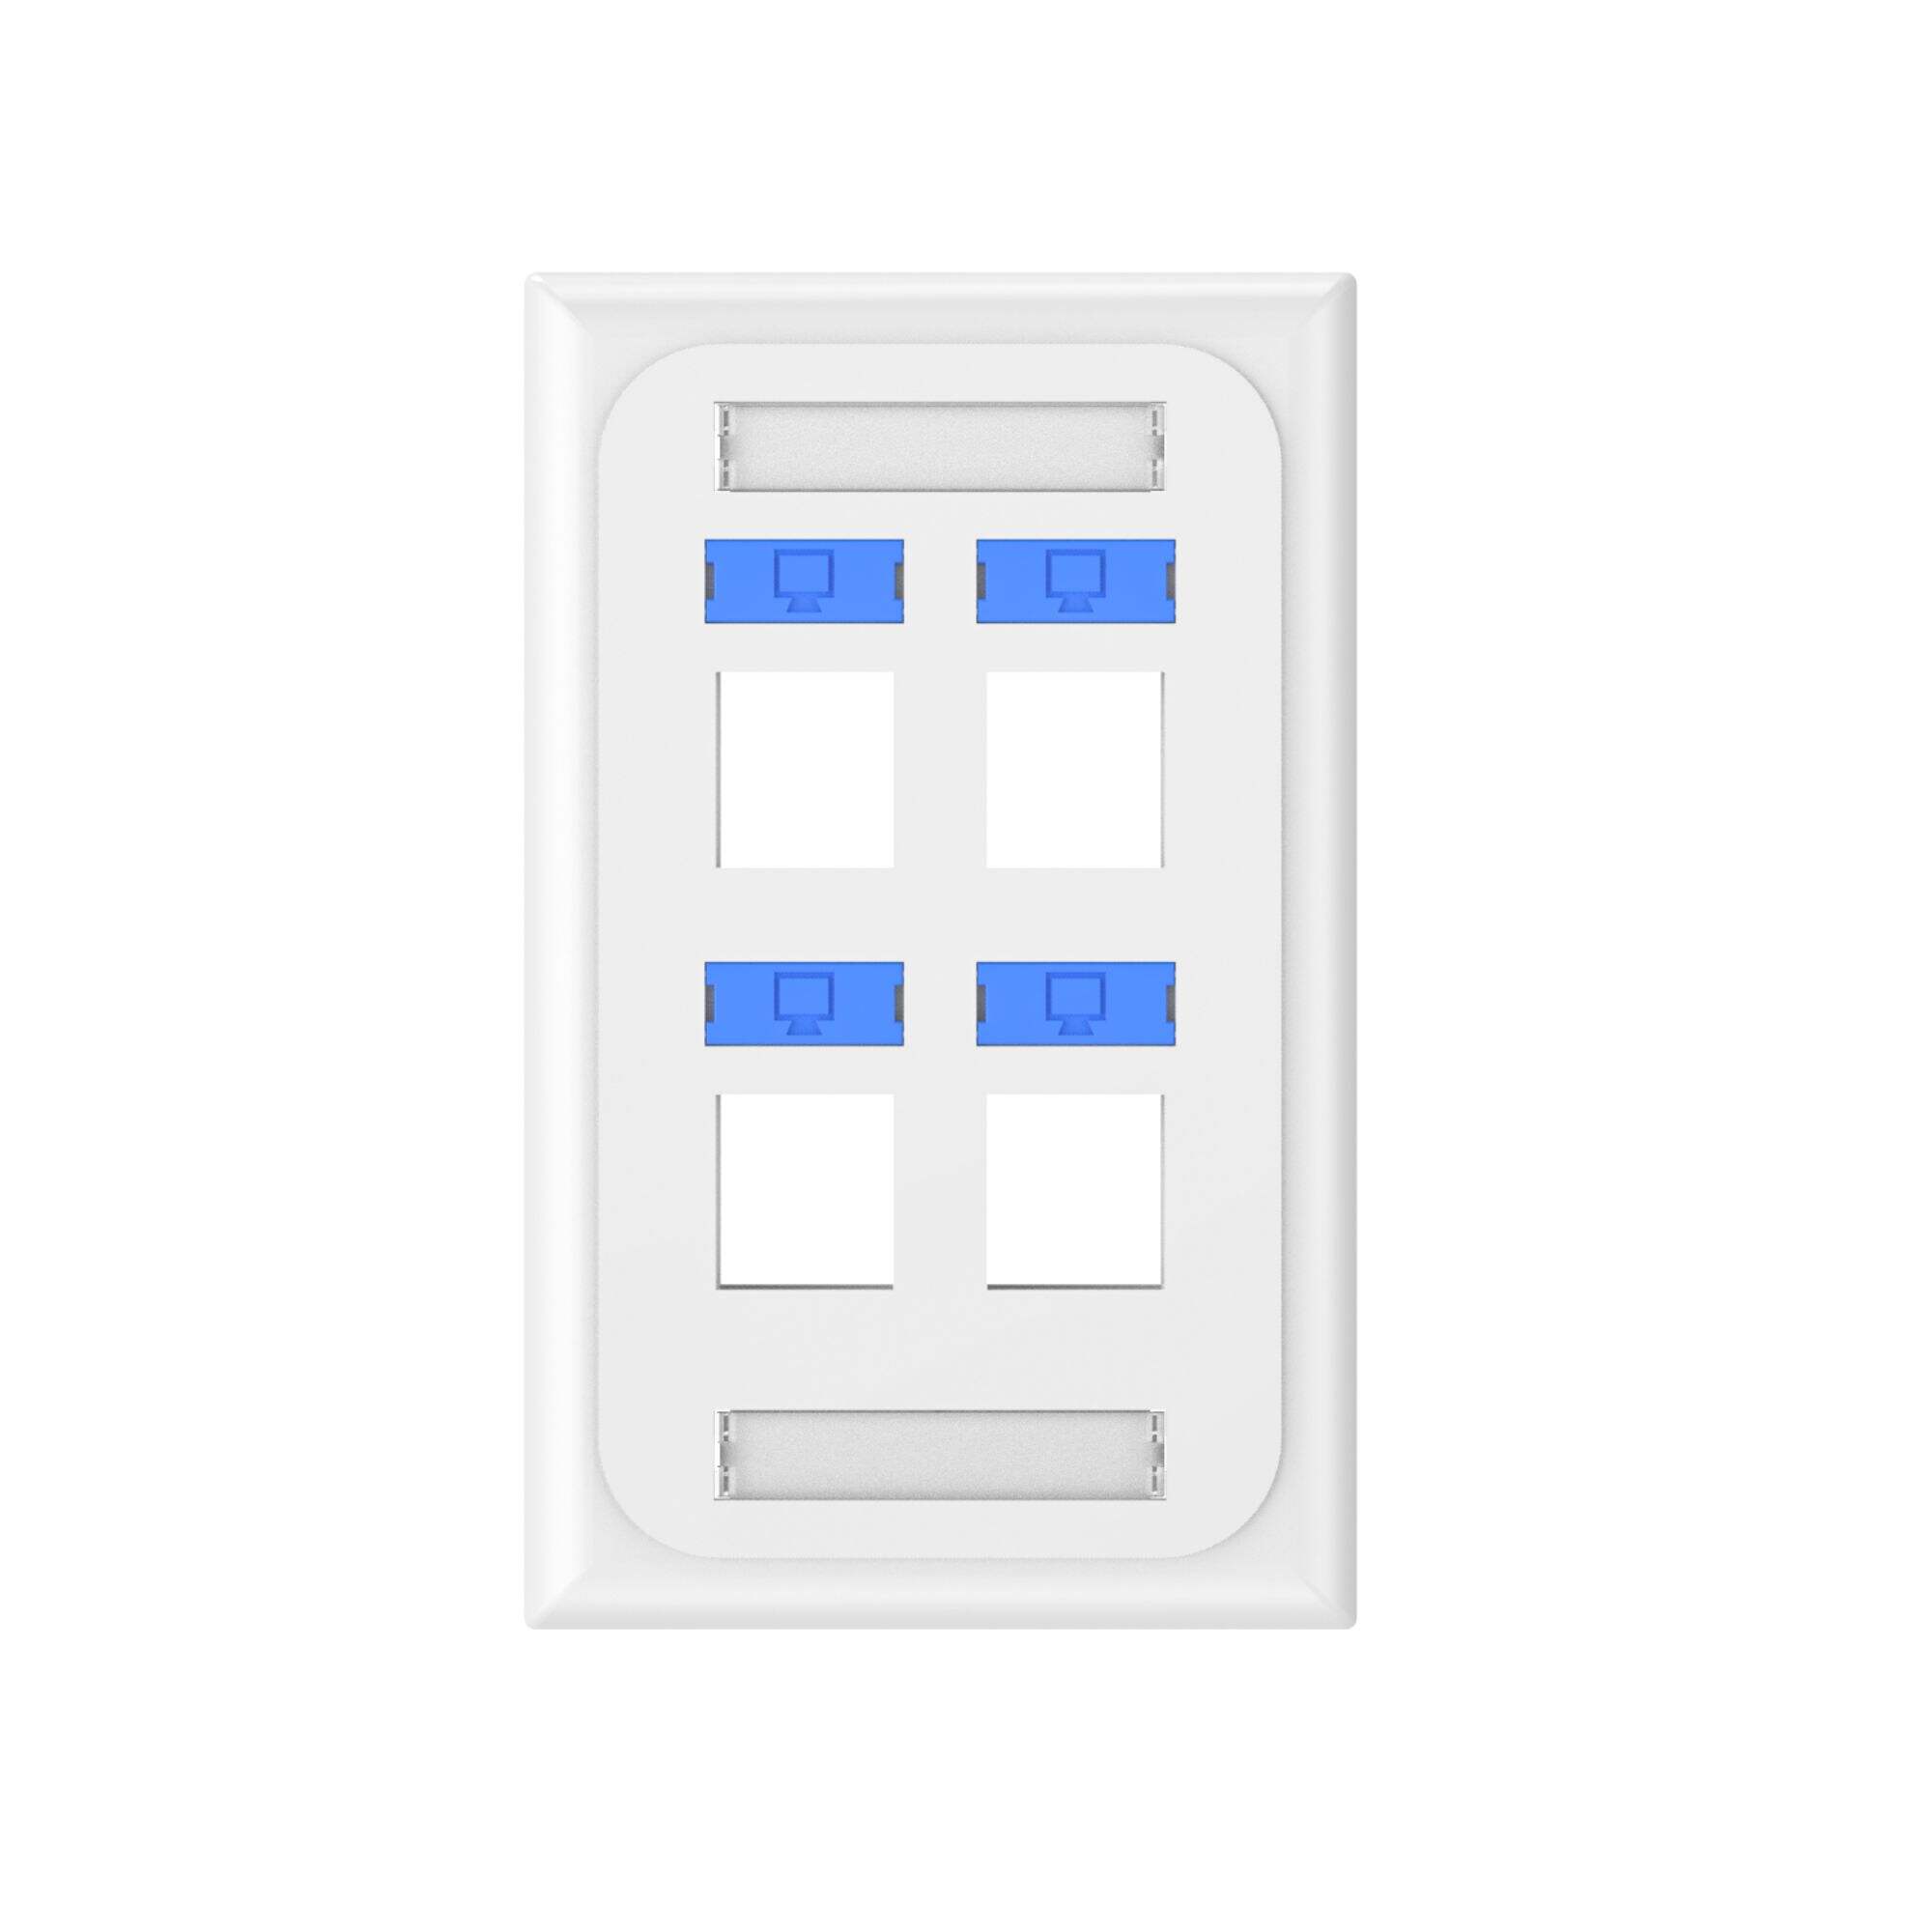 120 type cover shell Faceplate Rj45 RJ11 keystone Face Plate ps5 1/2/3/4/6 Port Socket Network Wall Faceplate